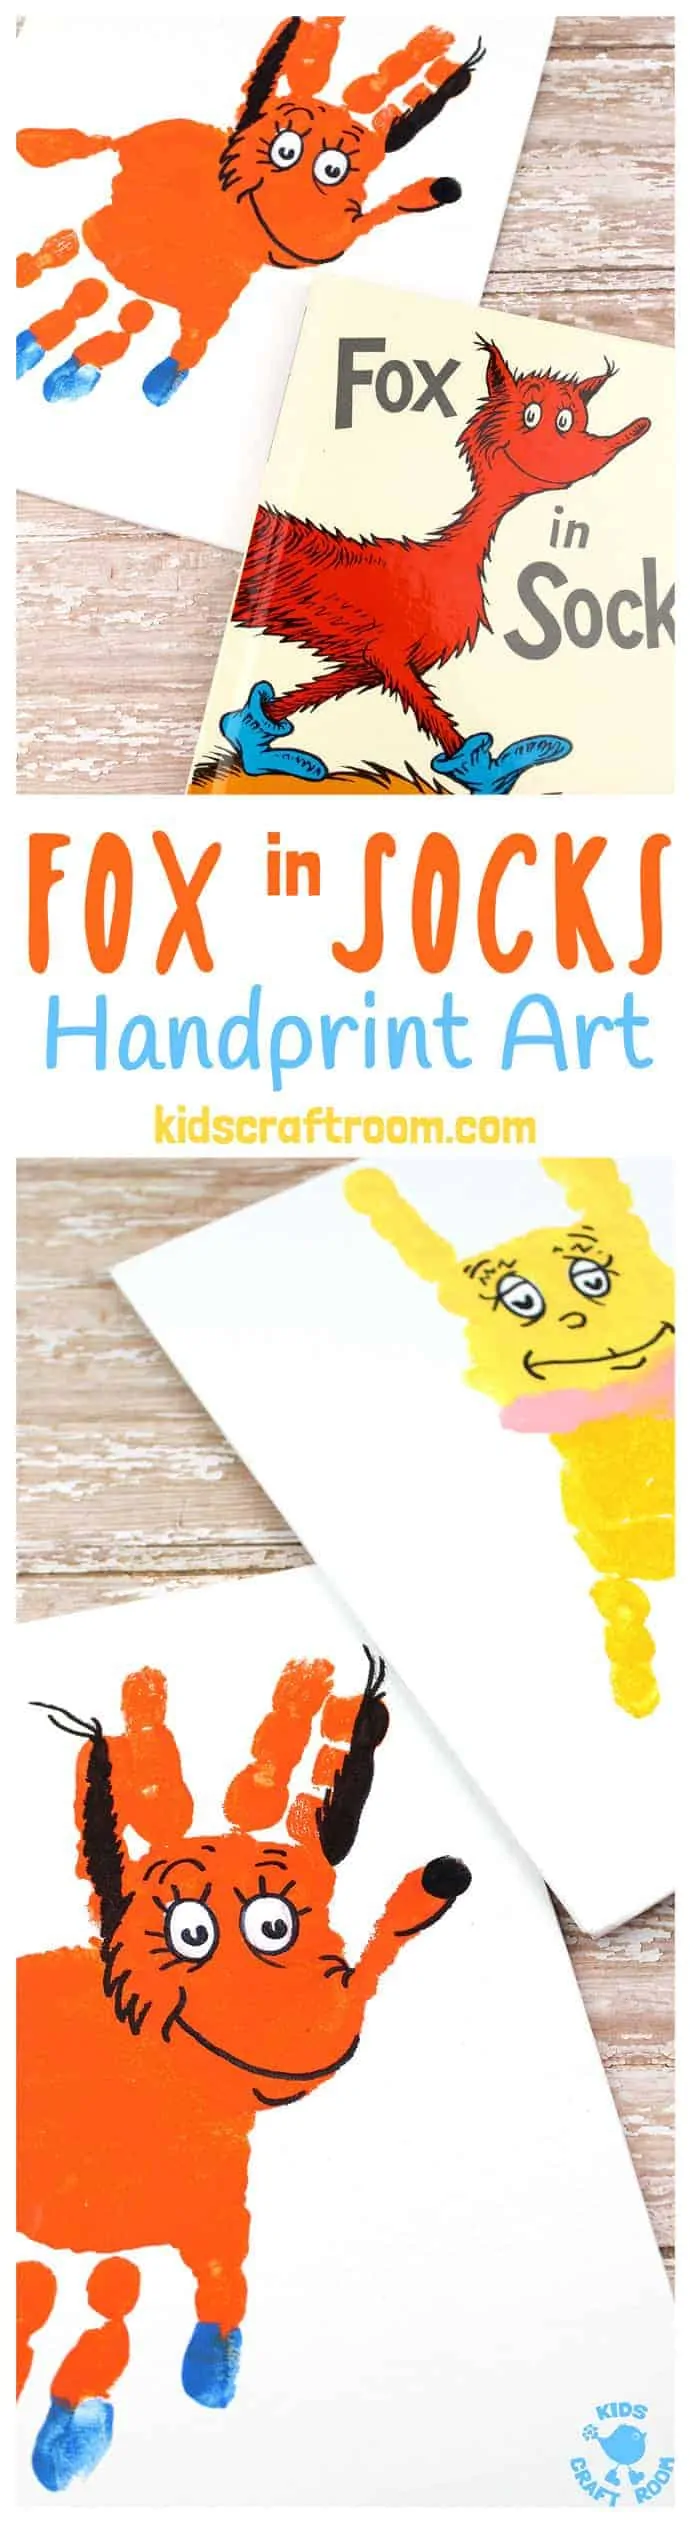 FOX IN SOCKS HANDPRINT CRAFT - Decorate your bedroom, classroom or reading nook with this super fun handprint art. Make the terrific tongue twister master, Fox In Socks and the tongue tied Knox! Both are easy to make and adorable. A great way to celebrate World Book Day and Dr Seuss' birthday. #handprintcrafts #drseuss #worldbookday #bookweek #FoxInSocks #Knox #bookcrafts #kidscrafts #craftsforkids #kidsliterature #kidscraft #kidsbooks #handprint #paintingideas #preschool 